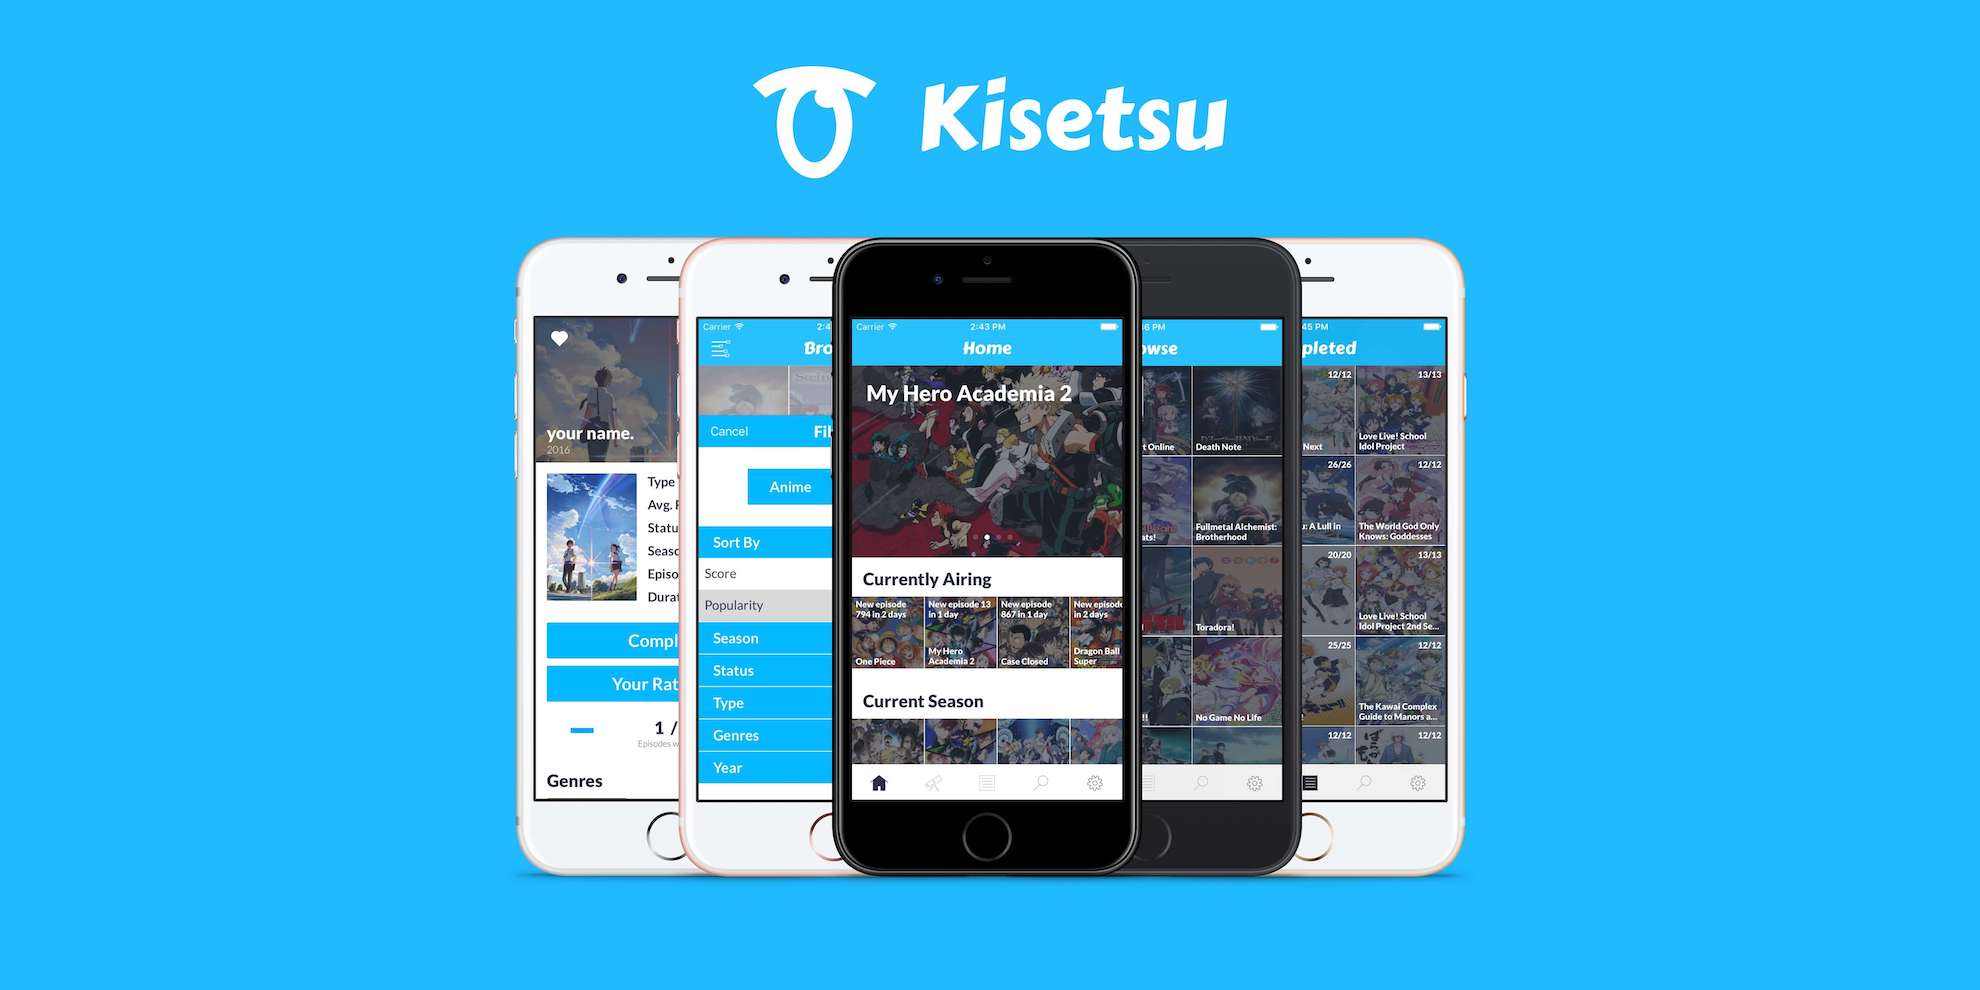 /images/projects/kisetsu-iphone-preview.jpeg screenshot in mockup